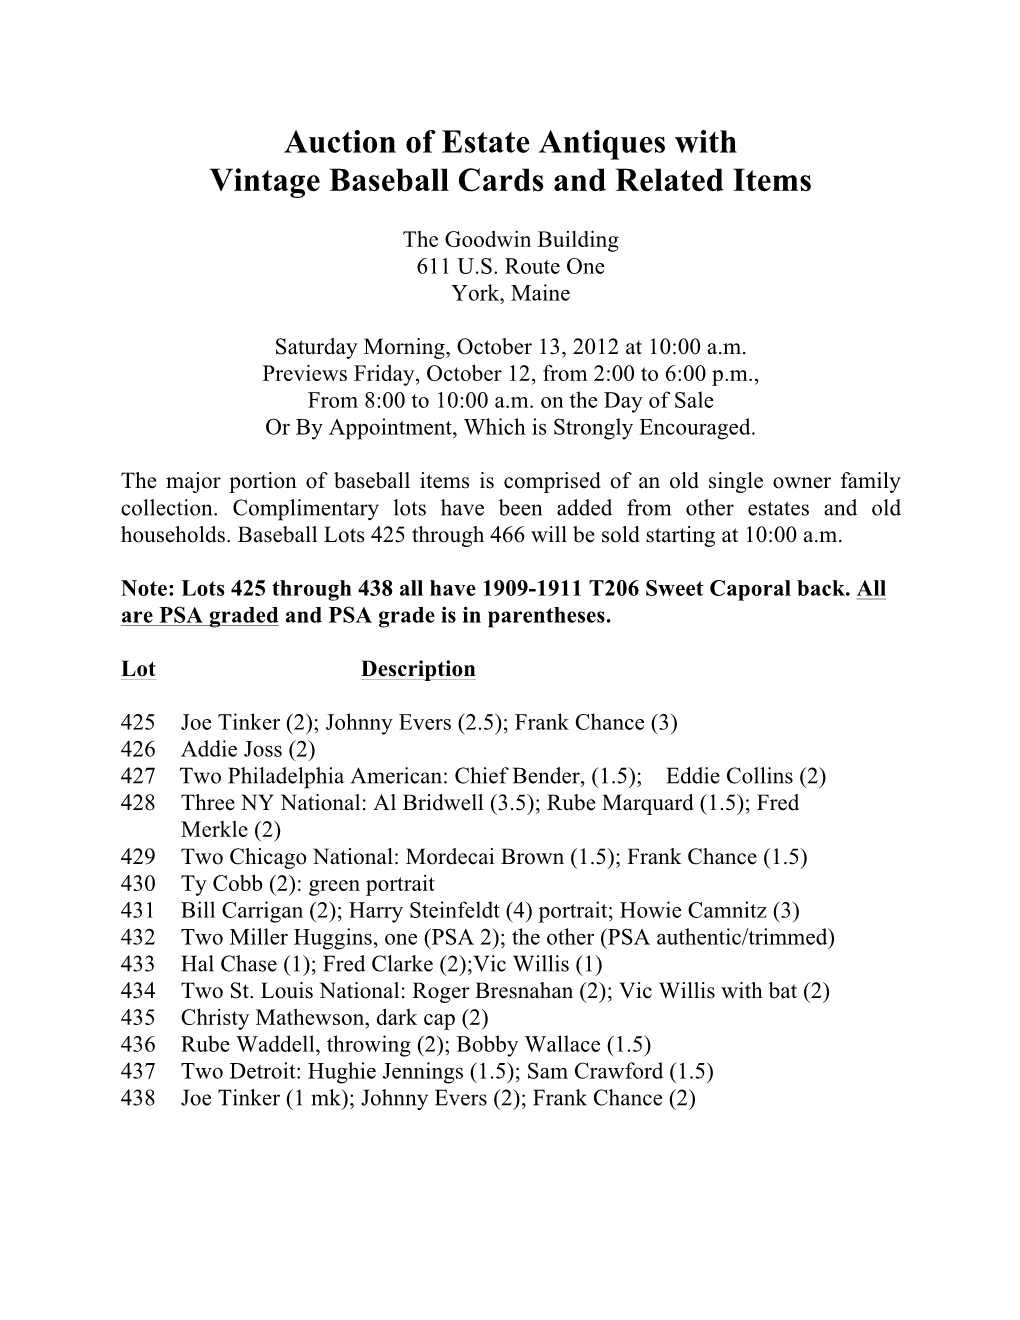 Auction of Estate Antiques with Vintage Baseball Cards and Related Items